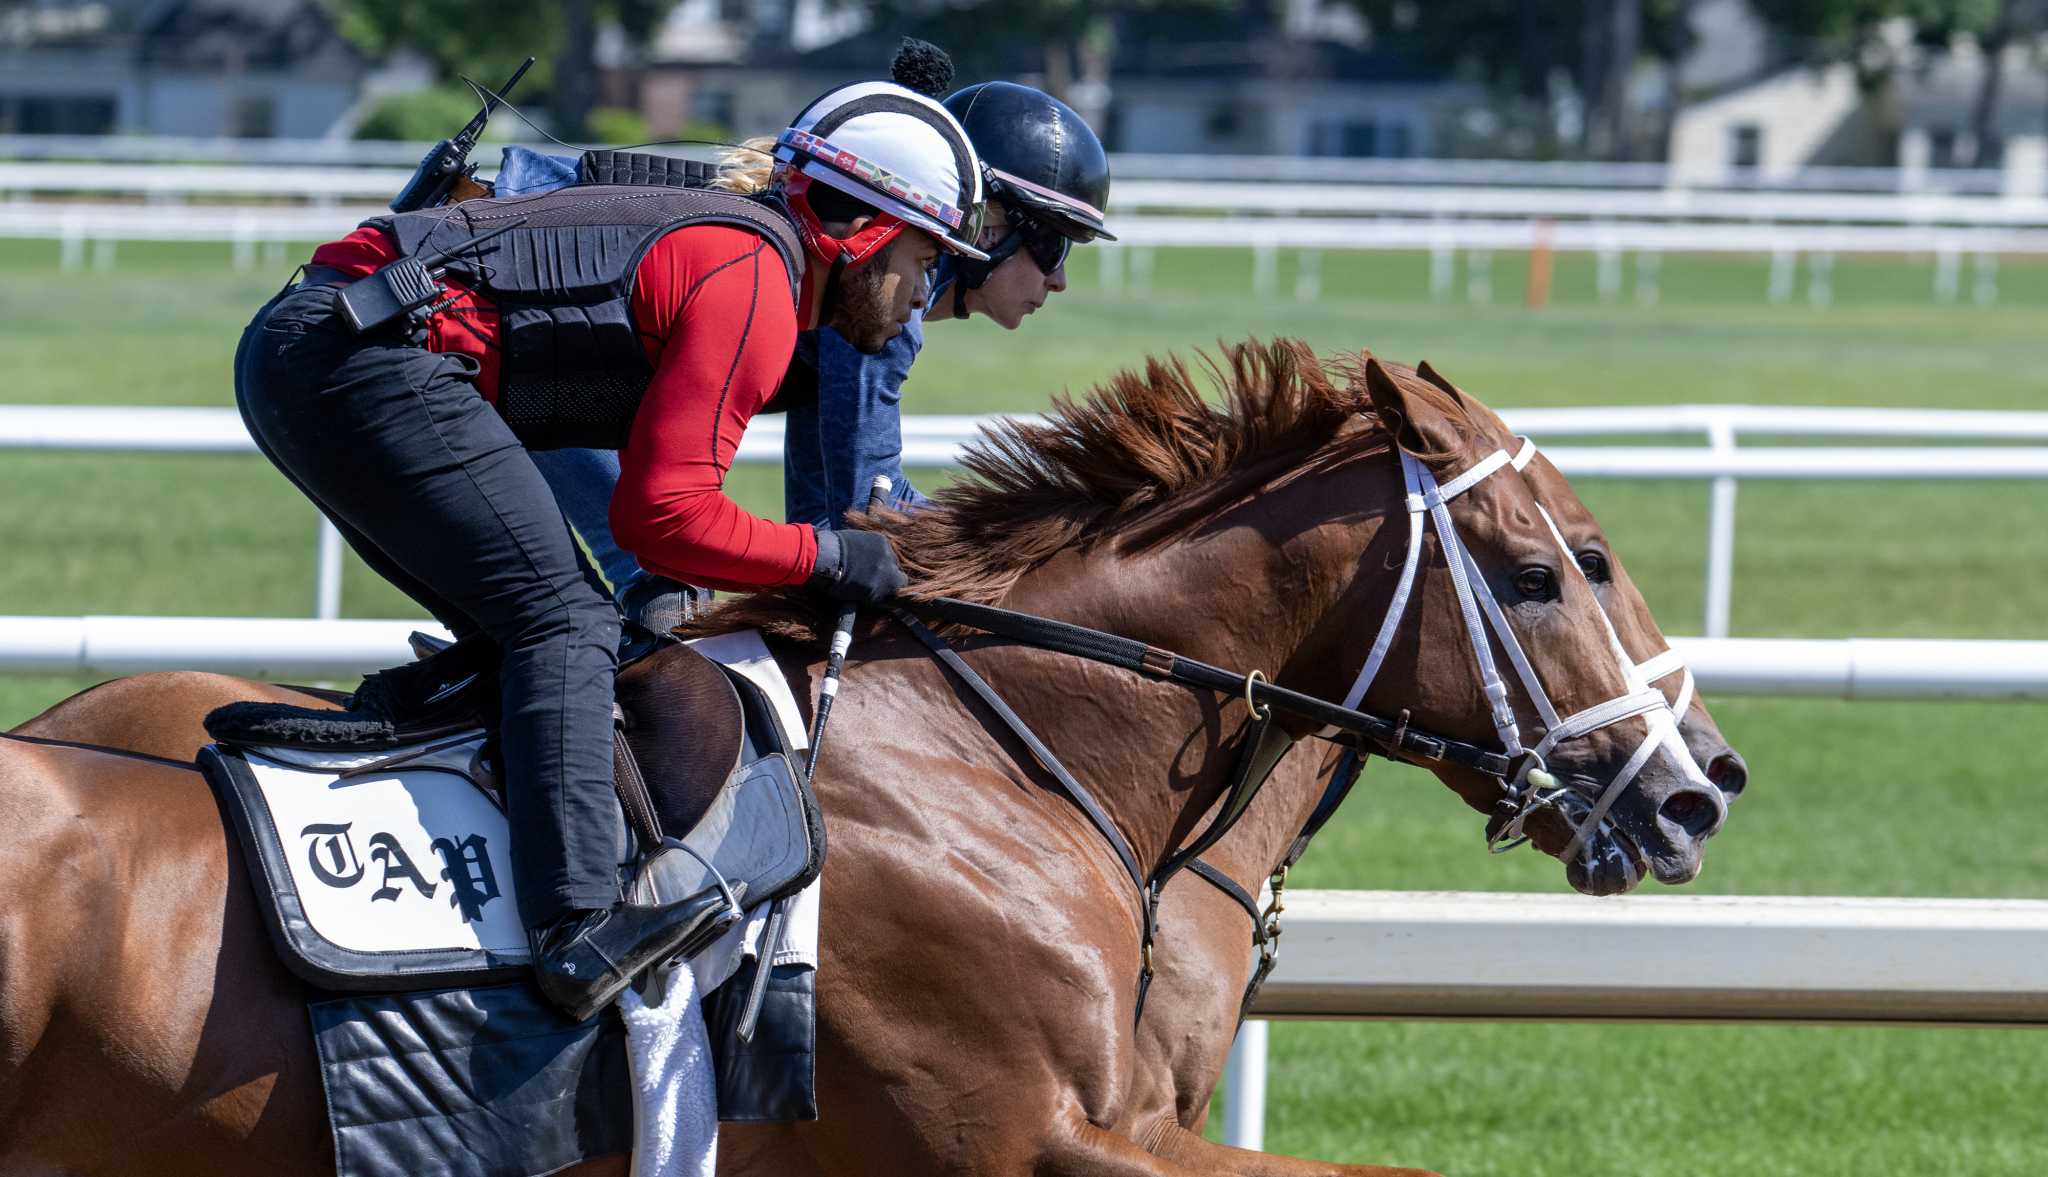 Going to the Belmont Stakes this weekend? Bring an umbrella, meteorologists say.